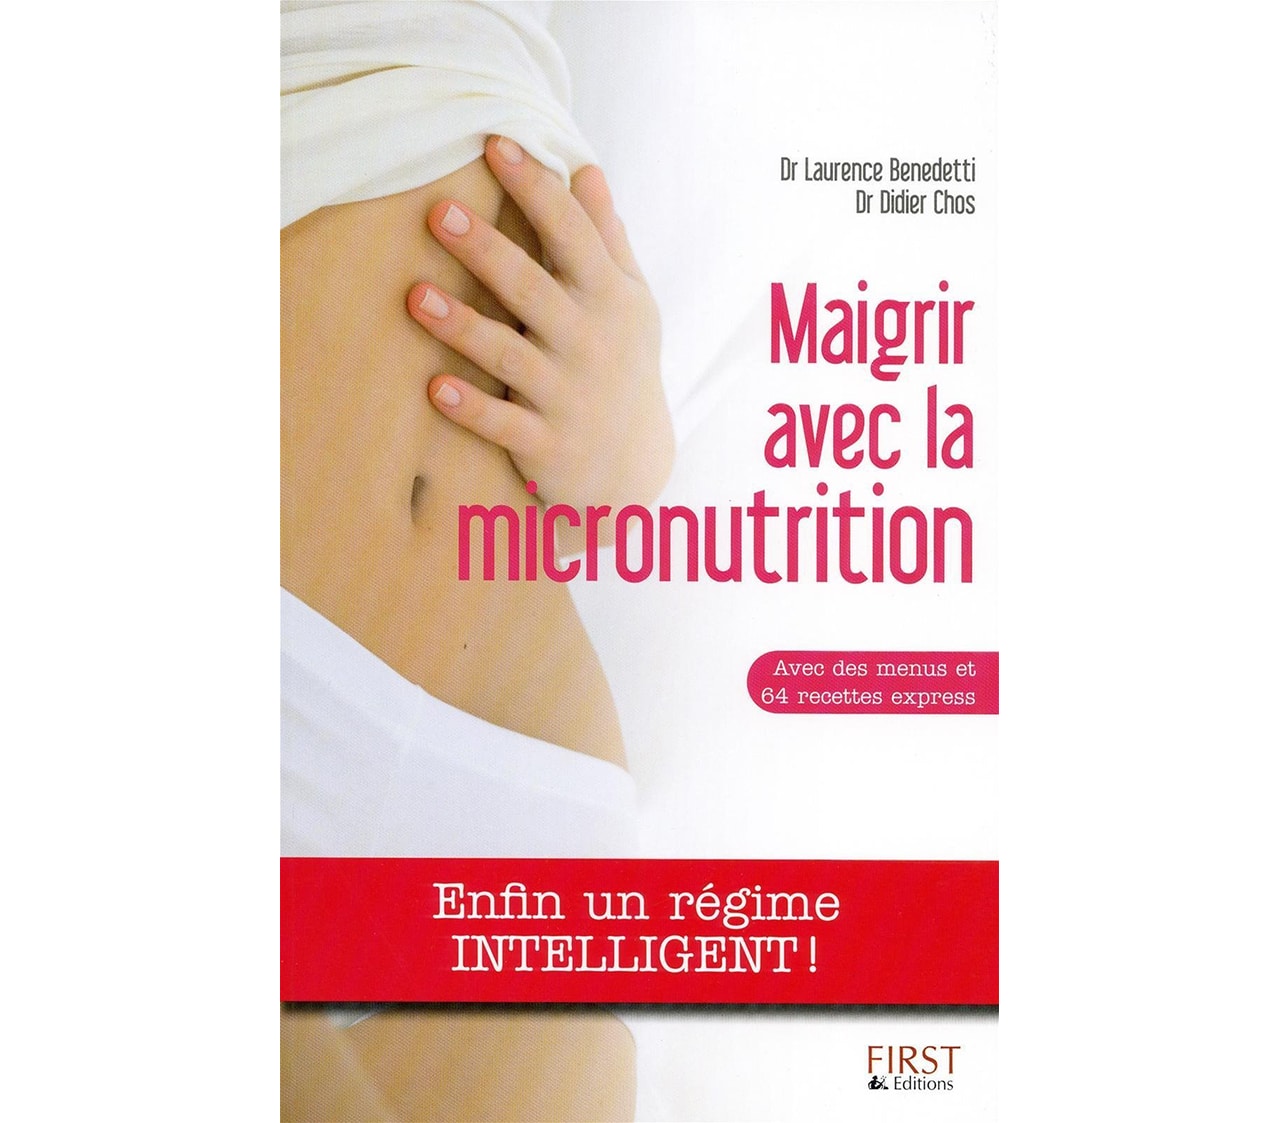 The best nutrition and slimming books